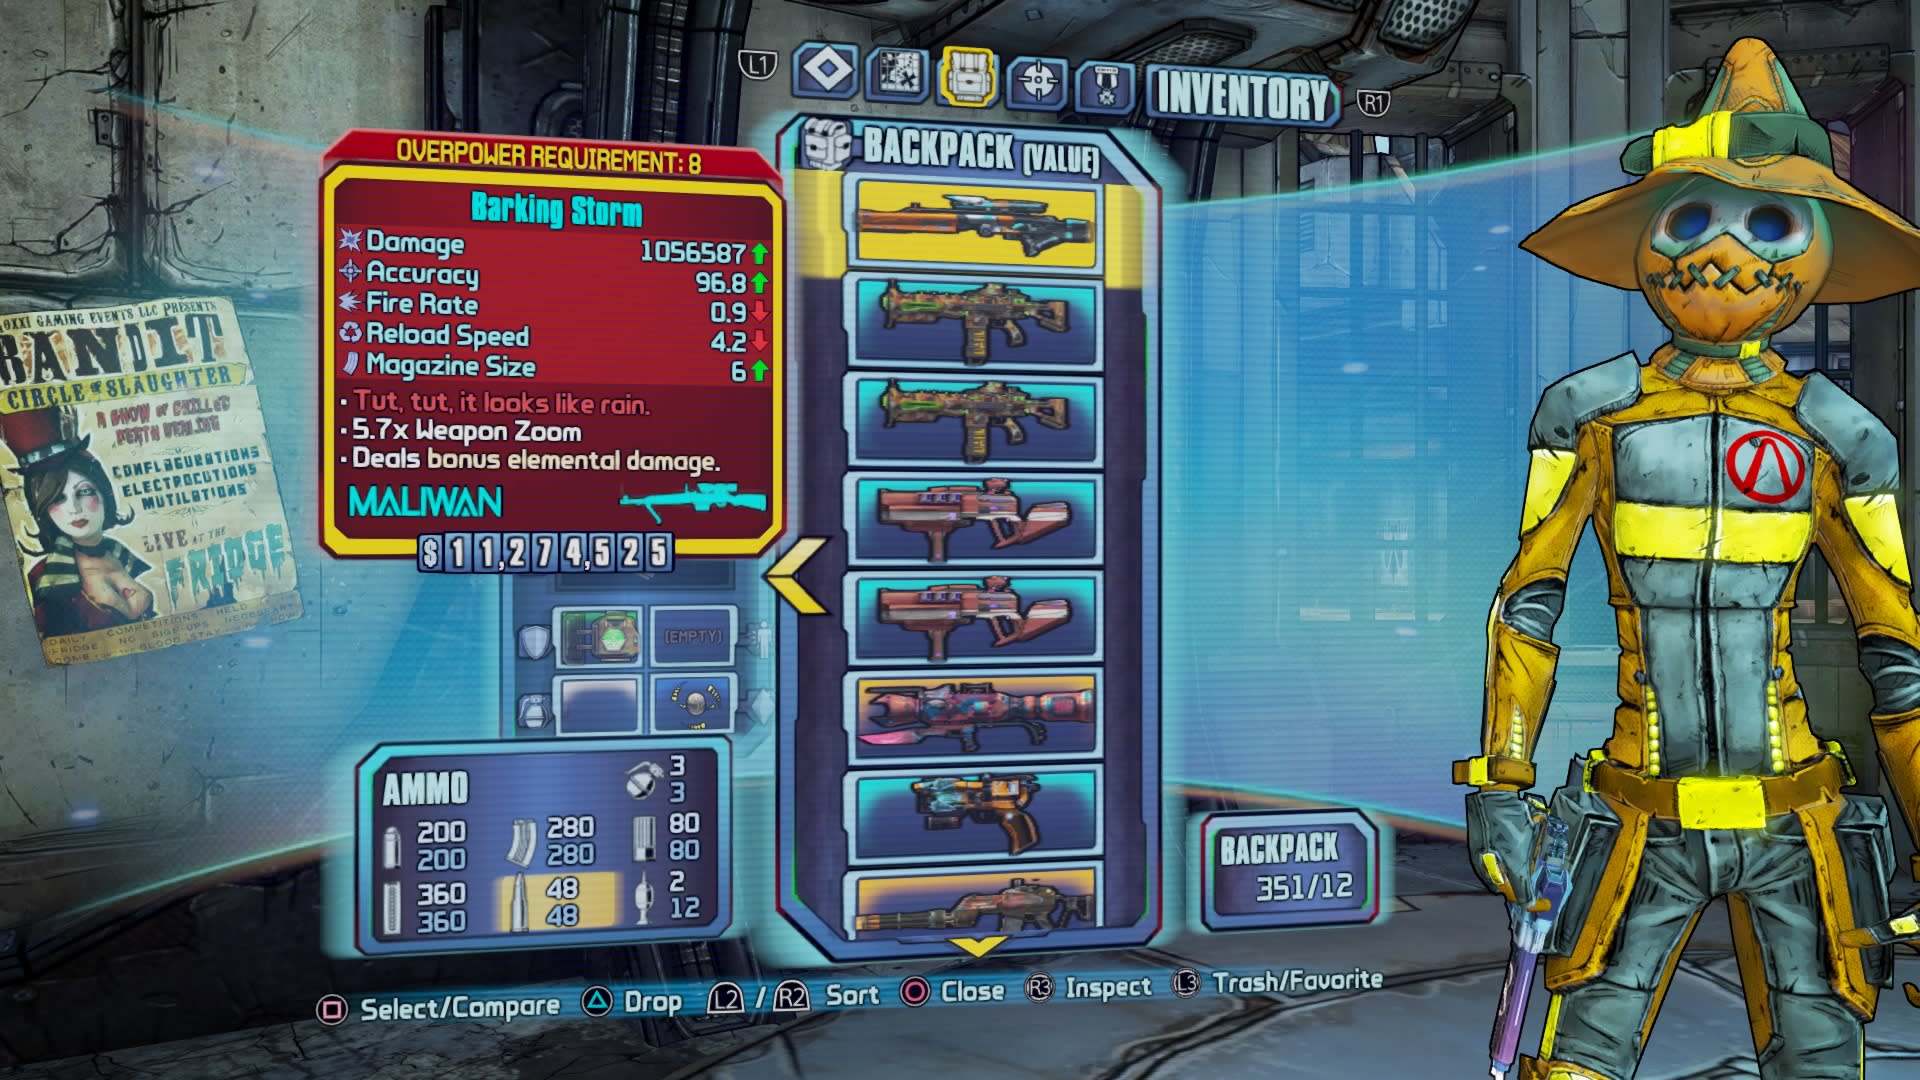 how to mod weapons in borderlands 2